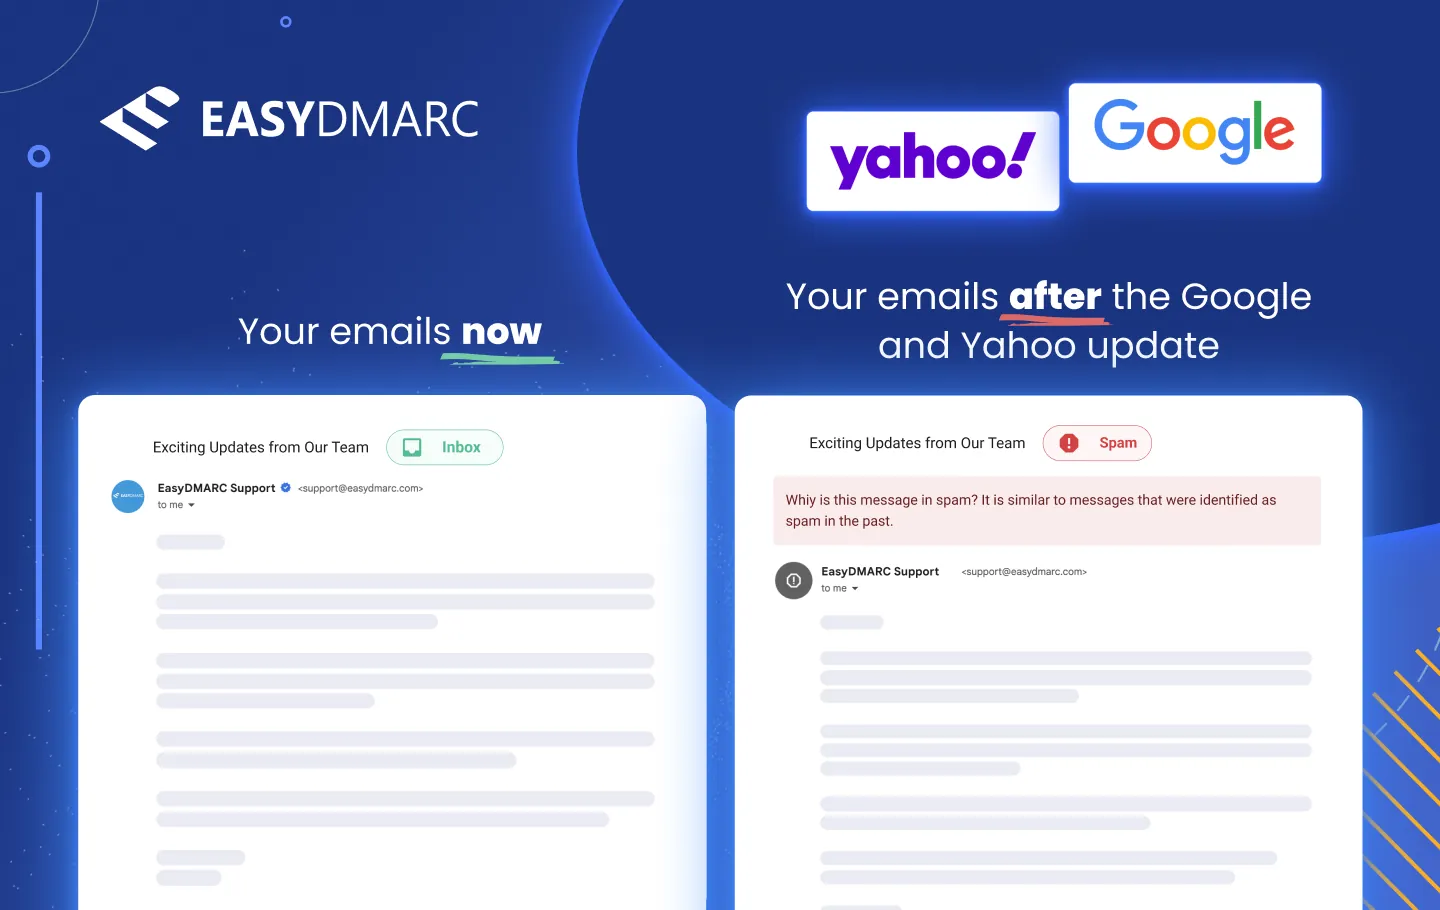 Google and Yahoo's new sender requirements